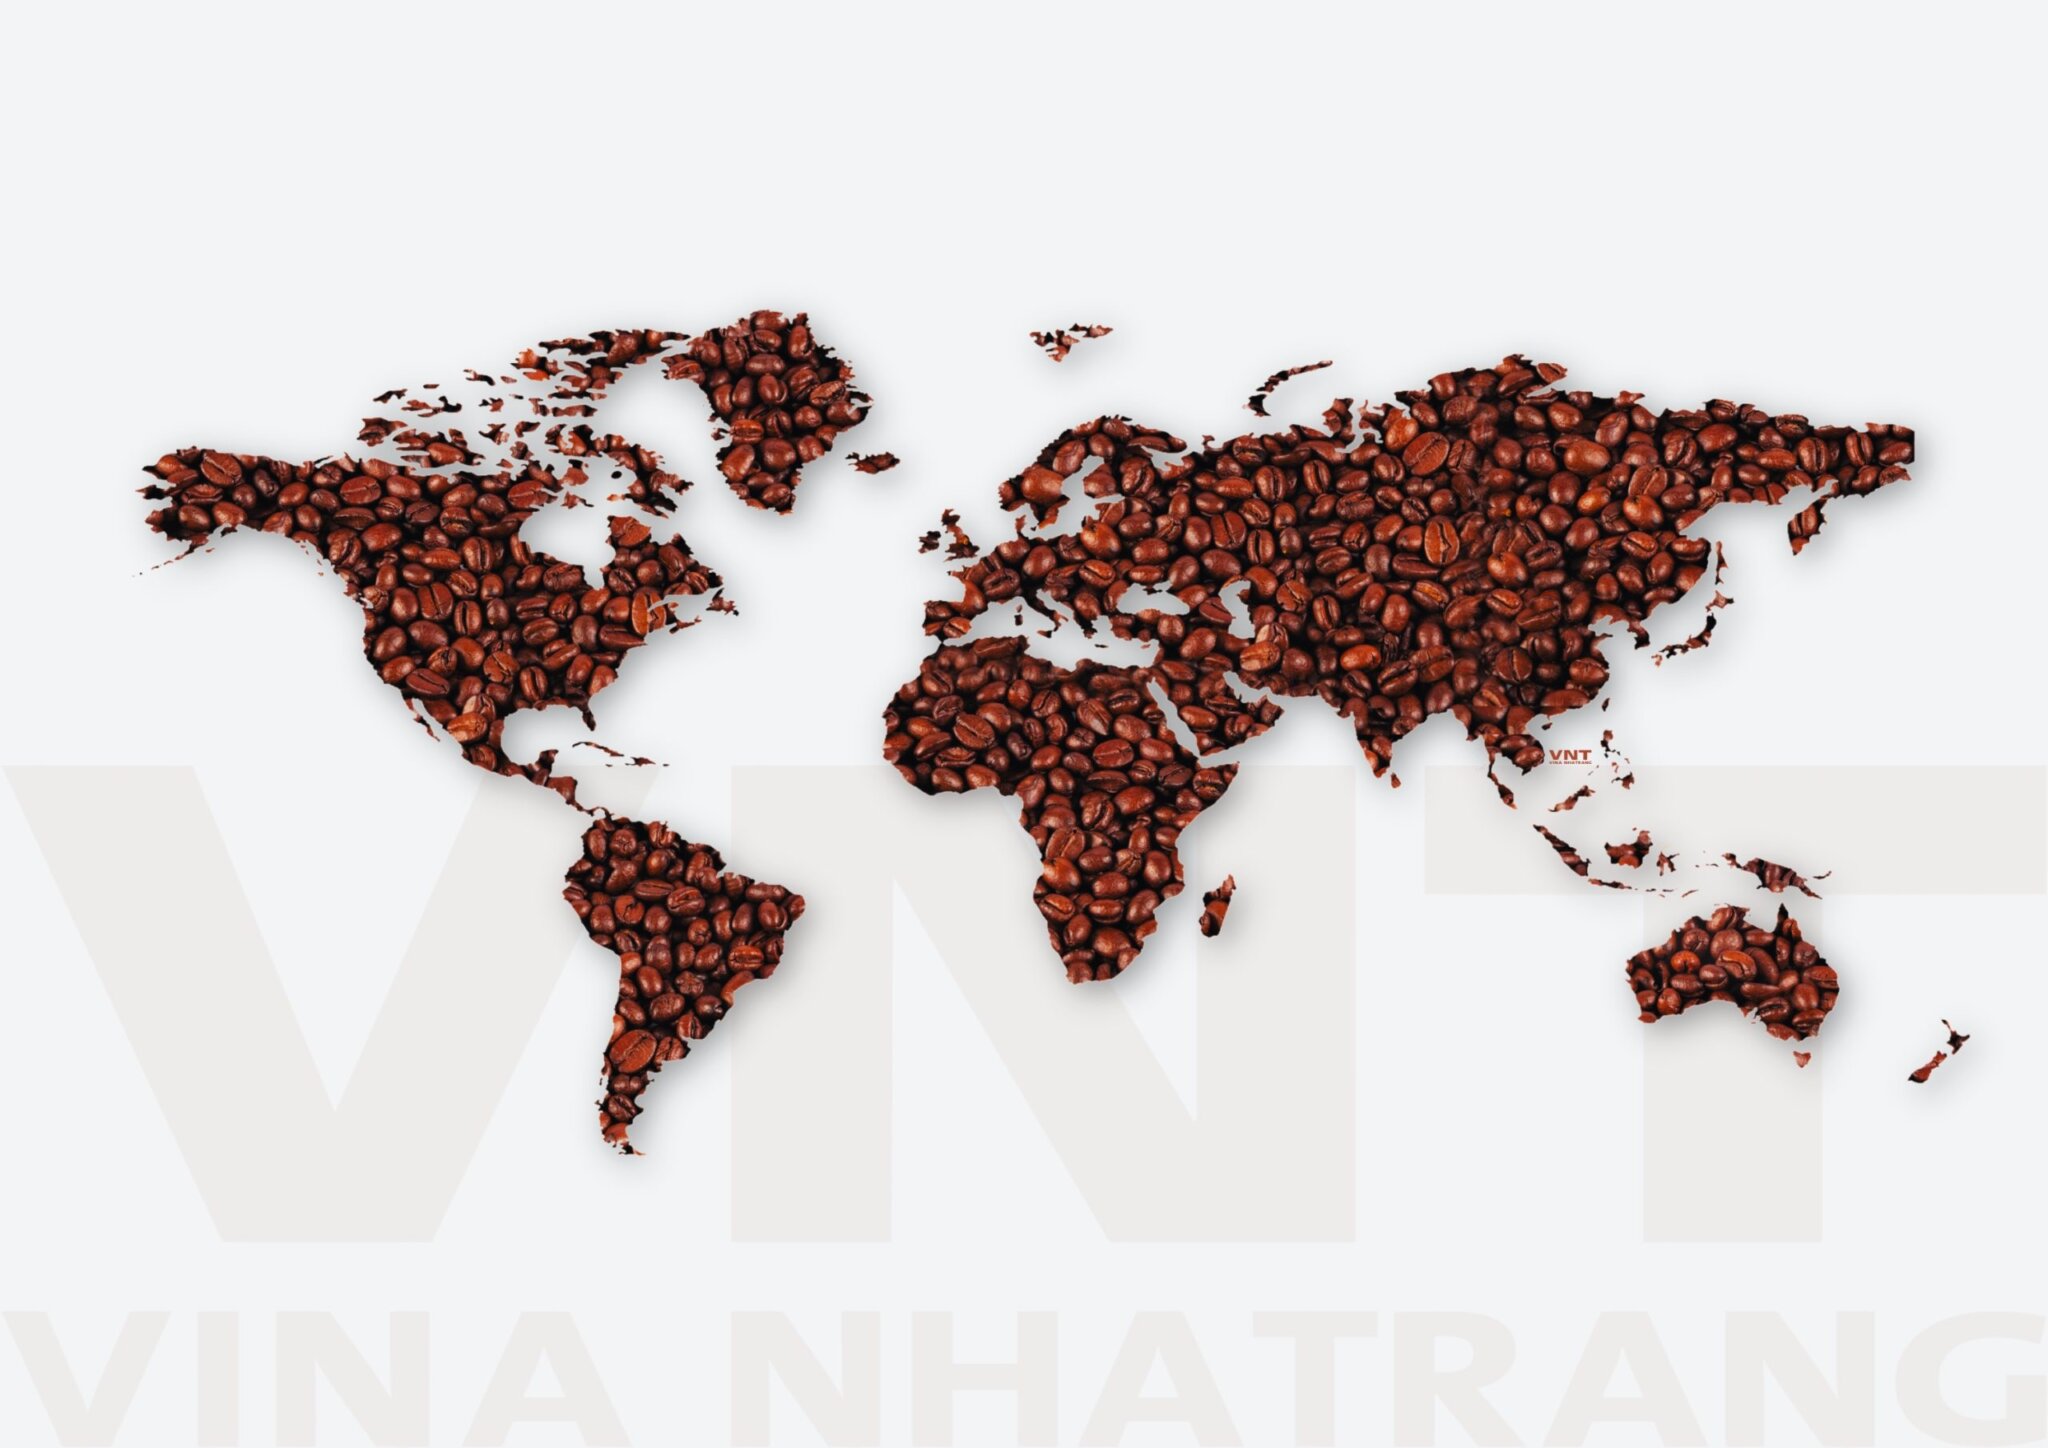 Let’s have a look at the Vietnamese coffee export data for the first 7 months of 2023